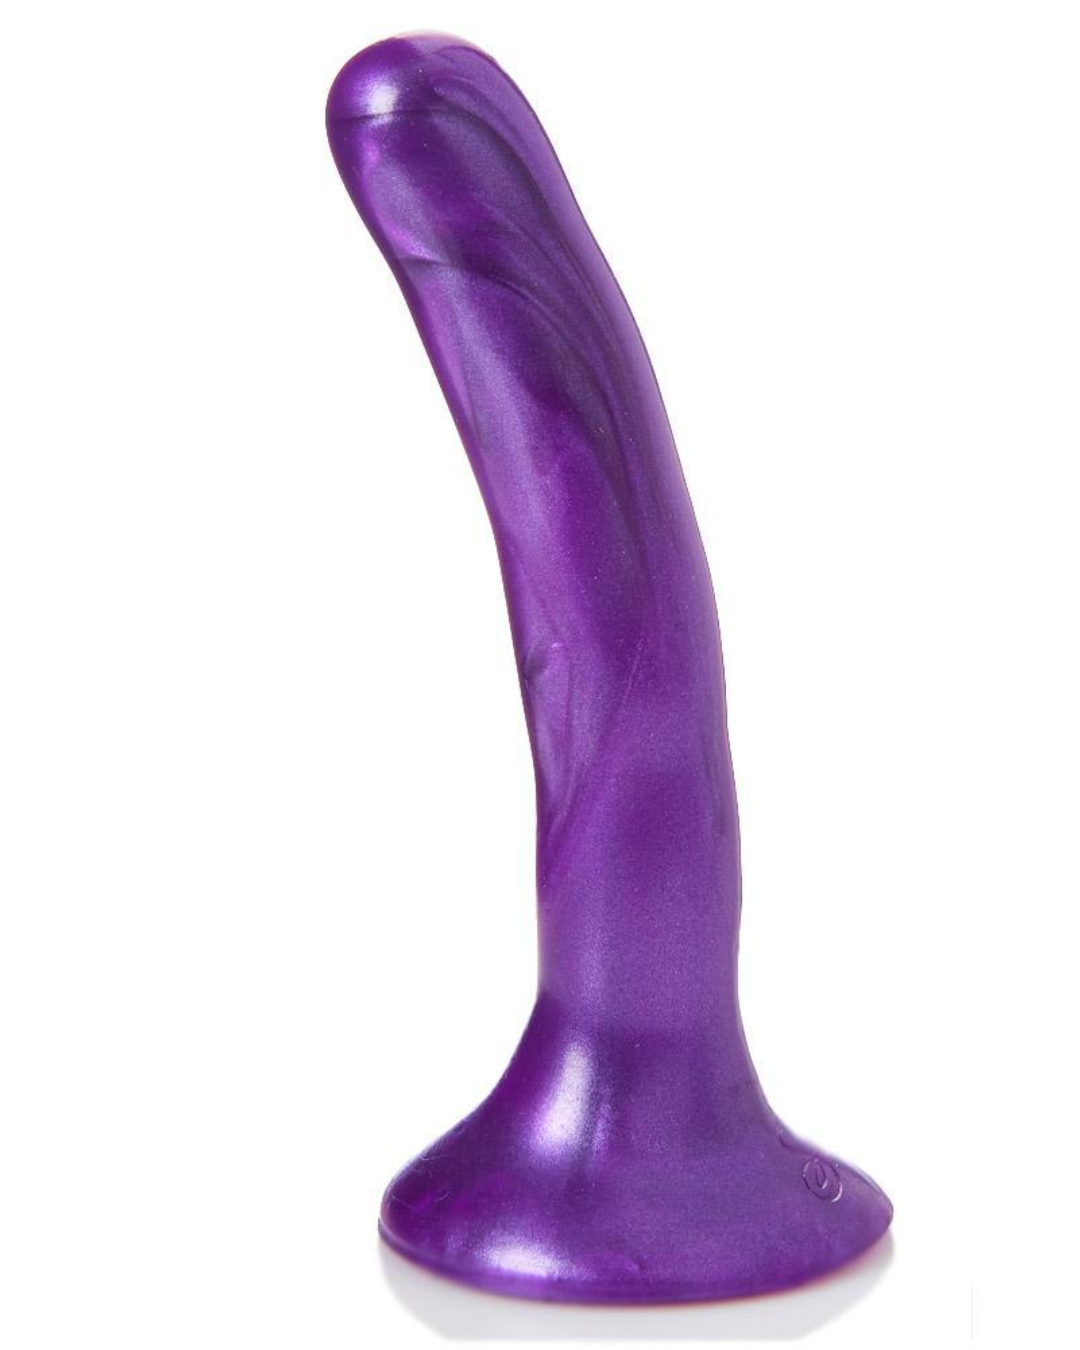 Please Slim Anal Silicone 5 Inch Dildo by Sportsheets side view